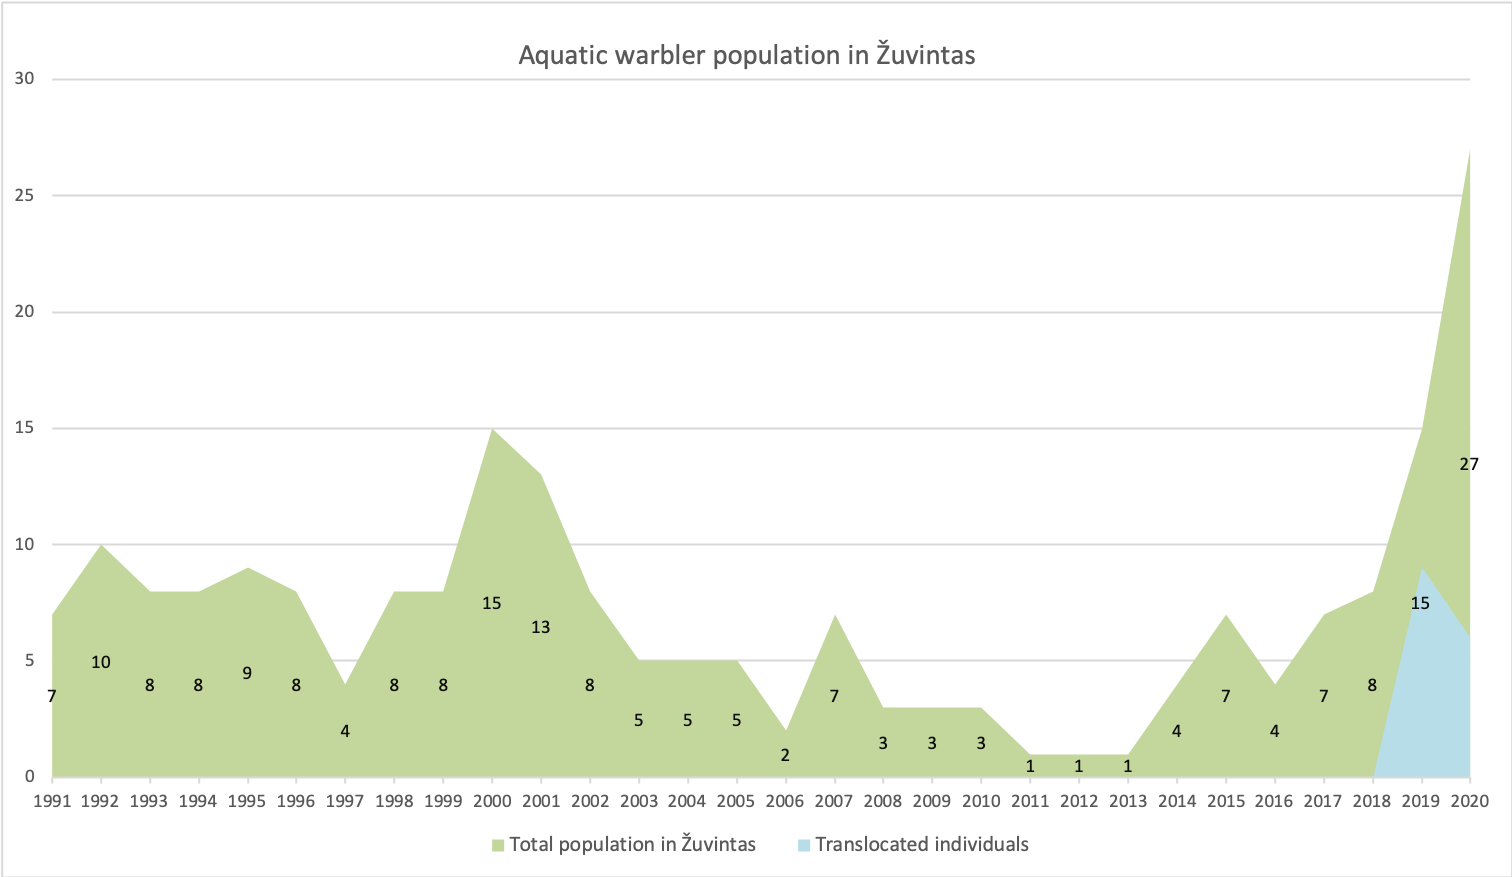 Population change of Aquatic warbler in Žuvintas Biosphere Reserve. Consecutive research of Aquatic warblers in the Žuvintas Biosphere Reserve has been carried out since 1991. To date, the highest number of singing males (15) has been observed in 2000 and 2019. The data of 2020 will be revised after the second count in July.  